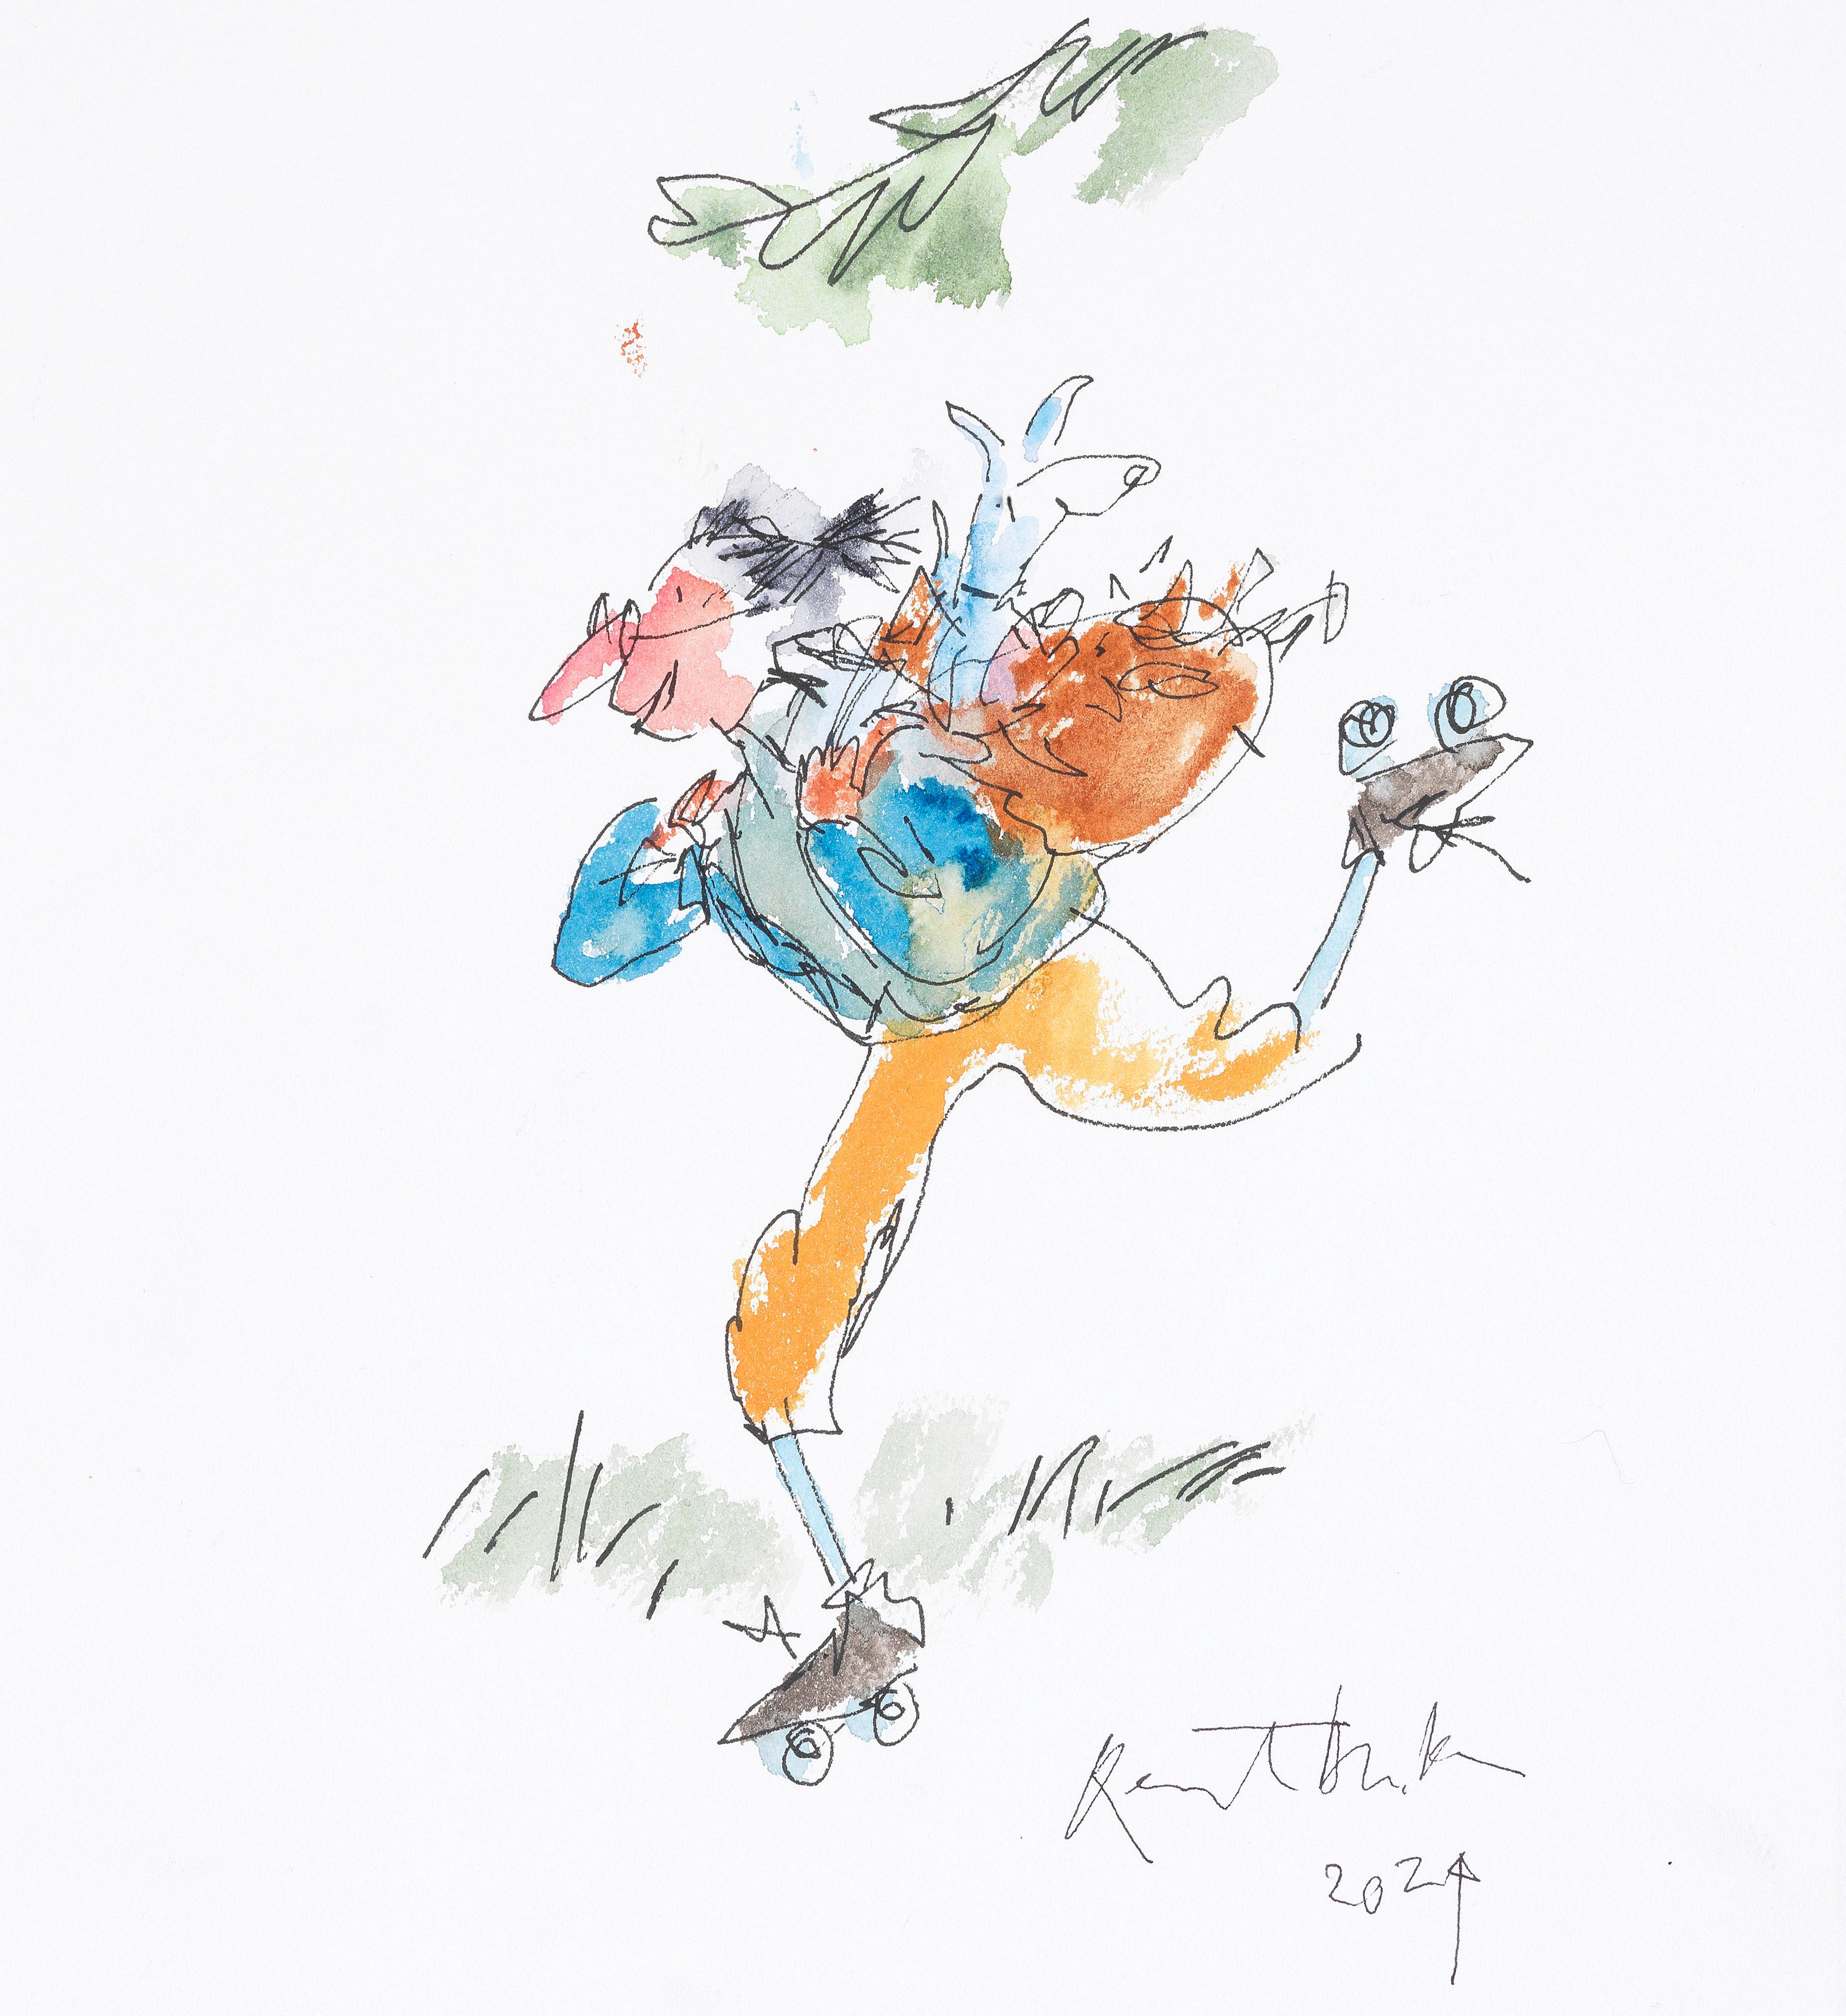 Illustration of a person skating on roller skates, they are wearing a rucksack on their back with a dog in it.